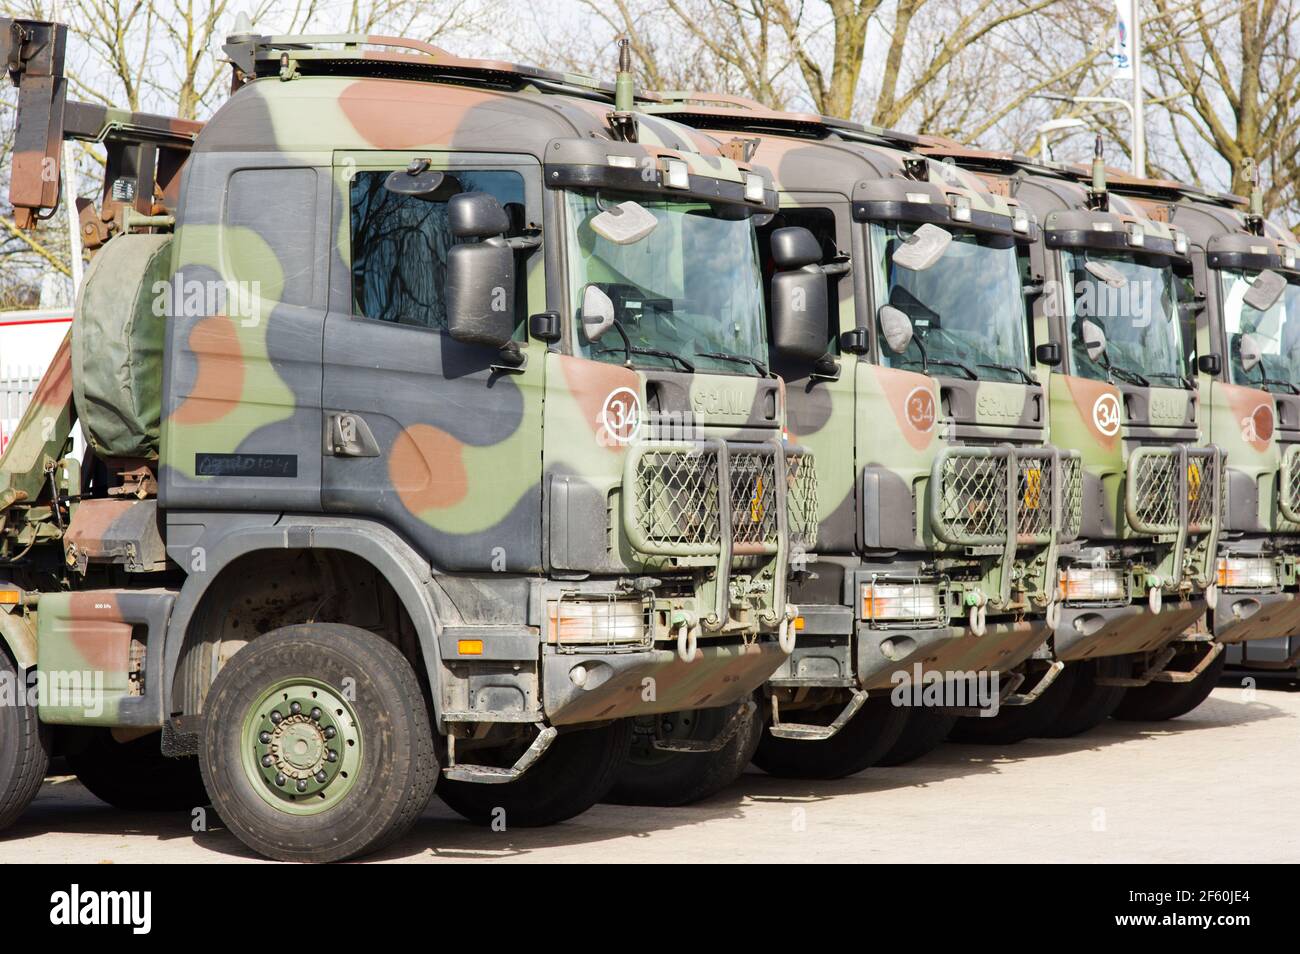 Arnhem, Netherlands - March 6, 2021: Dutch military Scania trucks painted in camouflage colors on a row on a parking lot Stock Photo